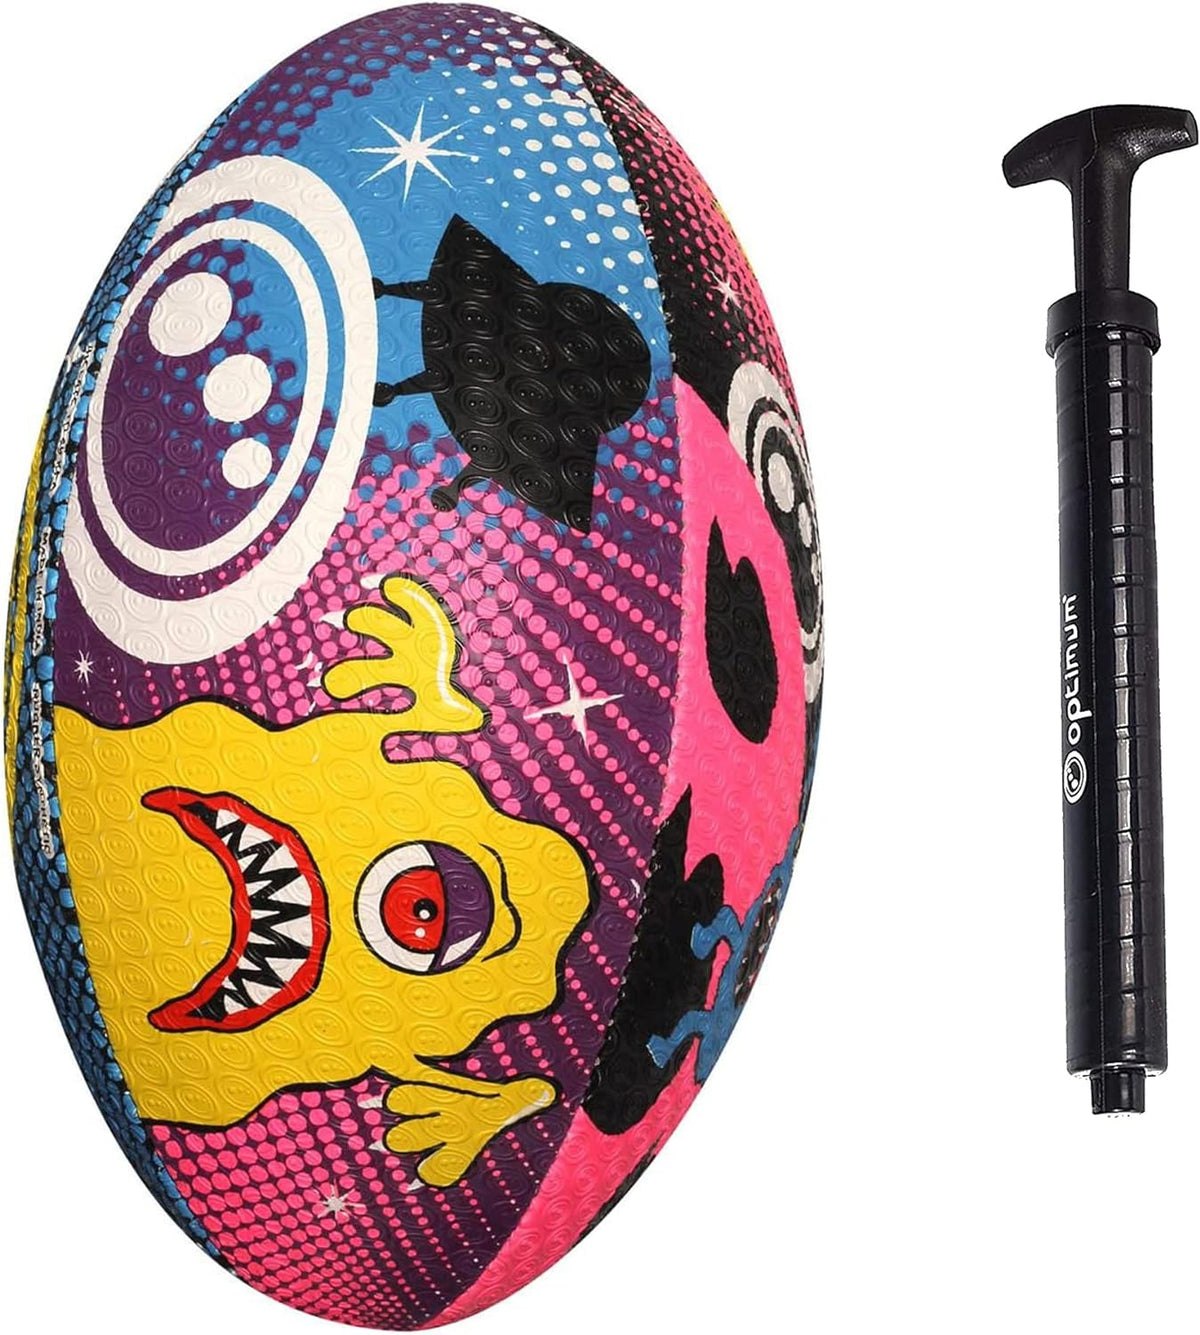 OPTIMUM RUGBY BALL - Space Monster - 3 - WITH PUMP - Optimum